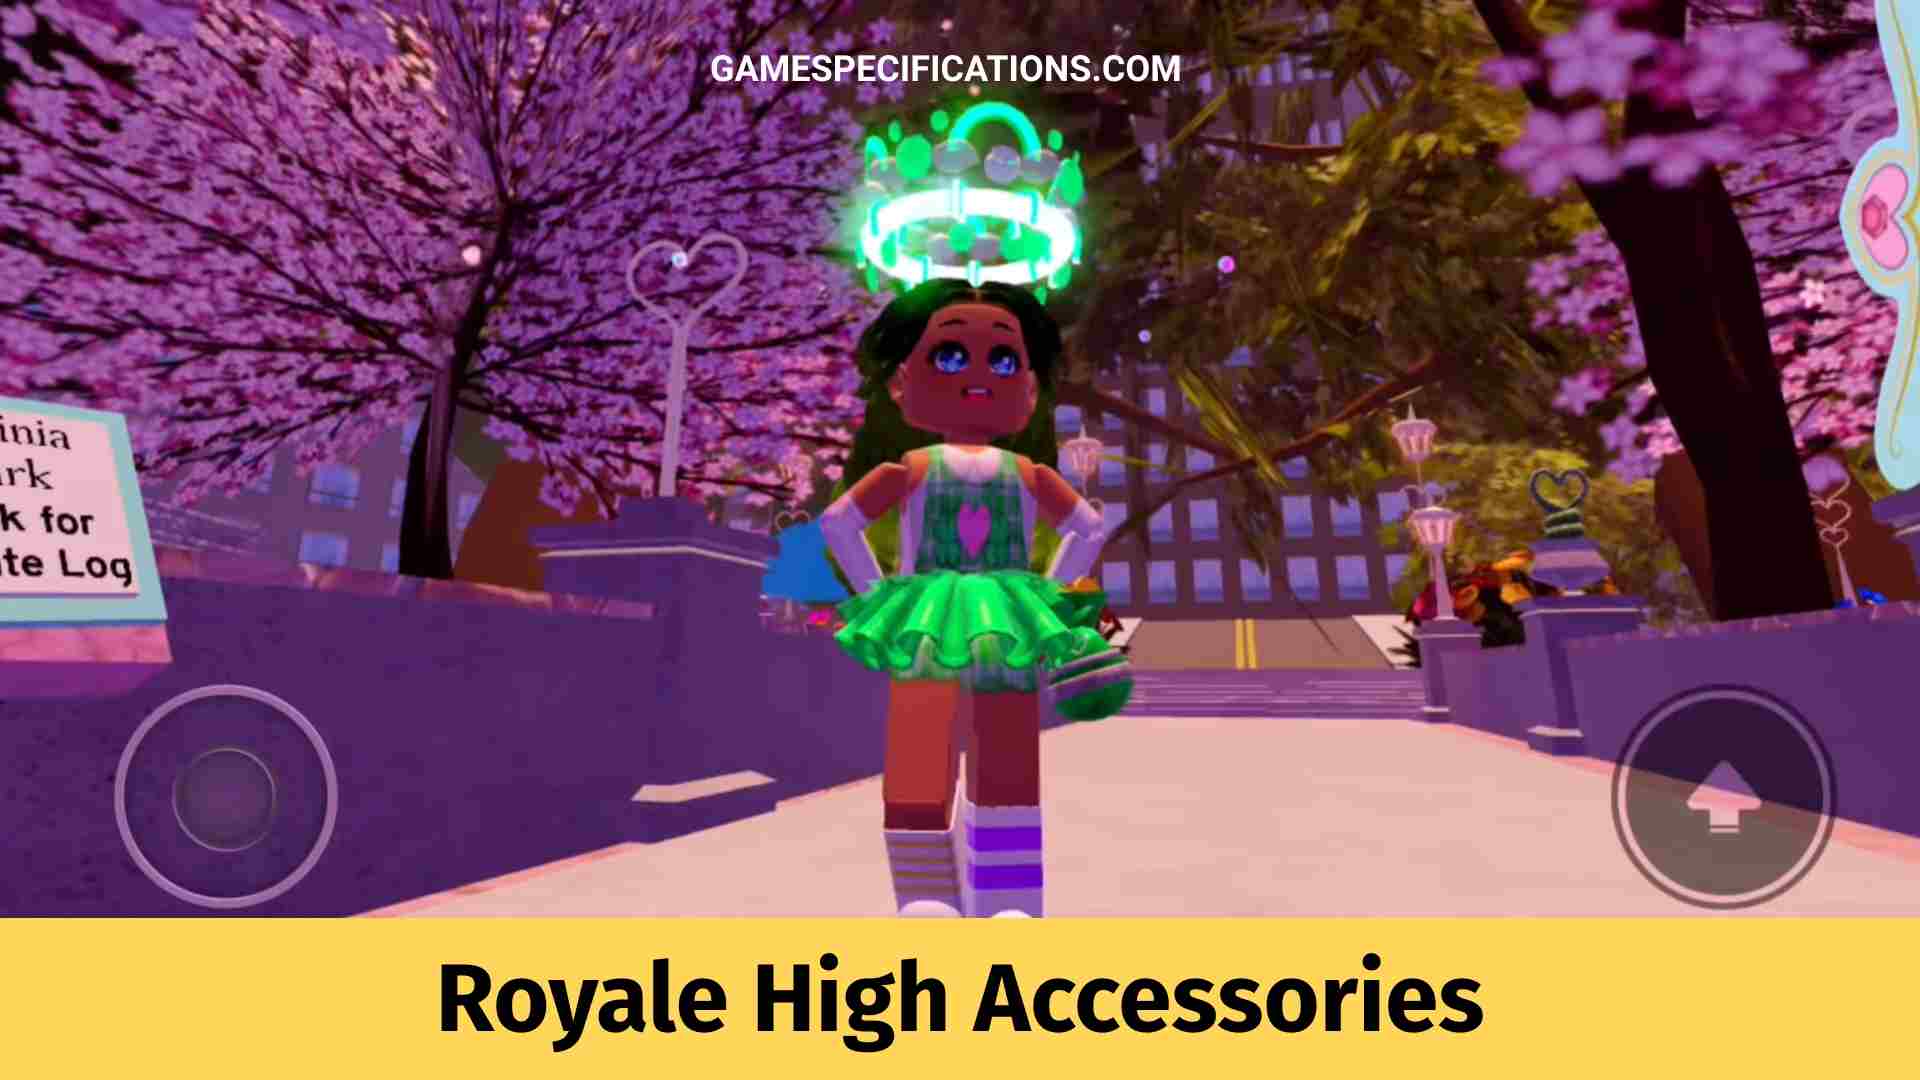 21 Underrated Royale High Accessories For Aesthetic Gamers Game Specifications - royal high school roblox accessories